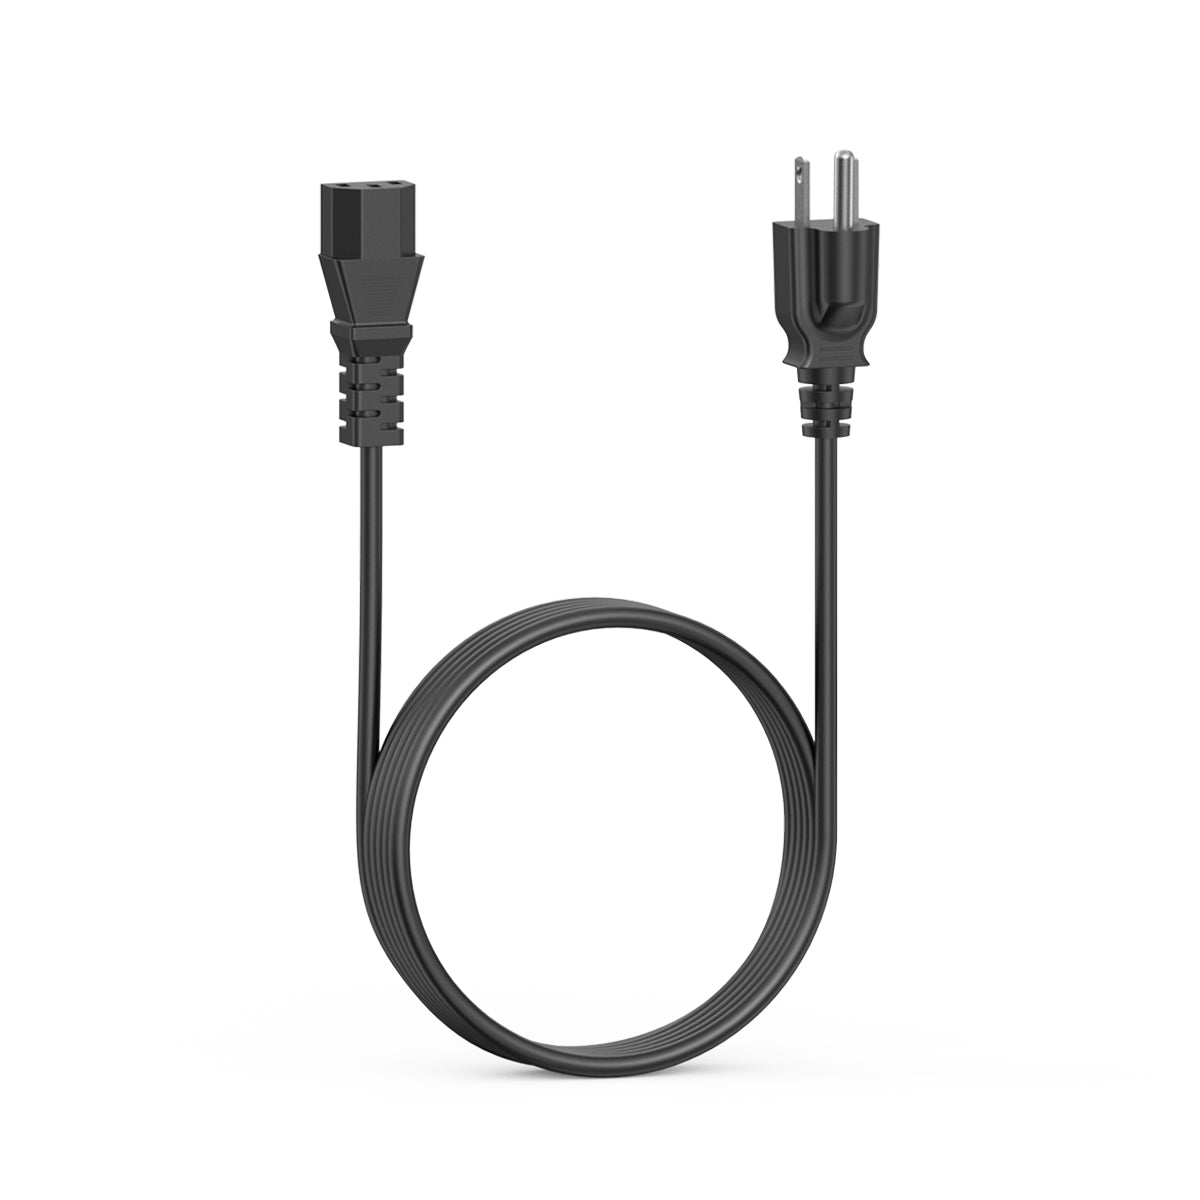 AC Charging Cable for MEGA Series